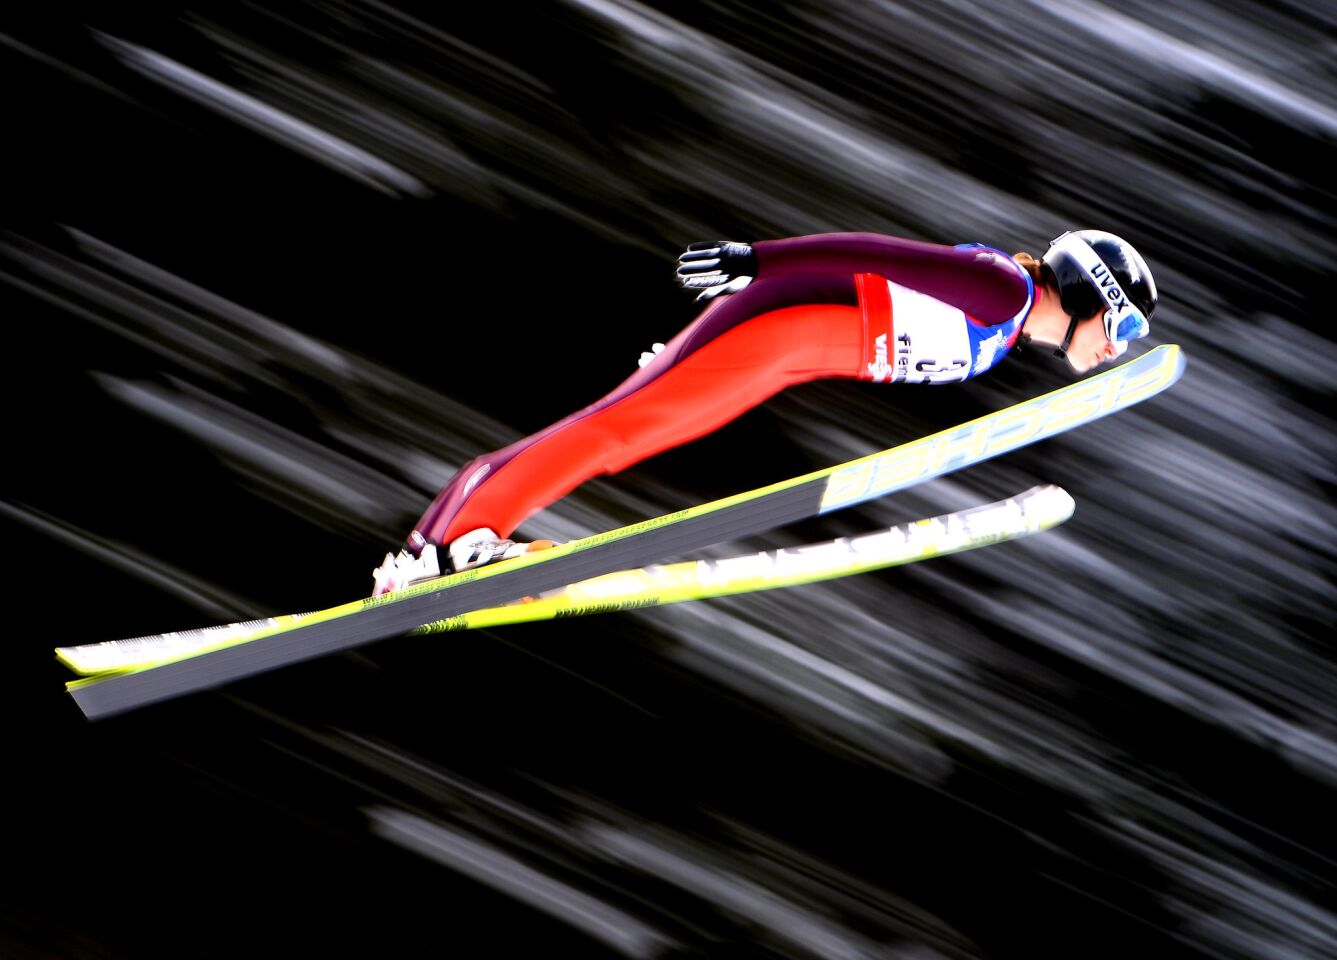 Jessica Jerome launches through the air during the Women's Ski Jumping HS106 Trial Round at the FIS Nordic World Ski Championships on Feb. 22 in Val di Fiemme, Italy.